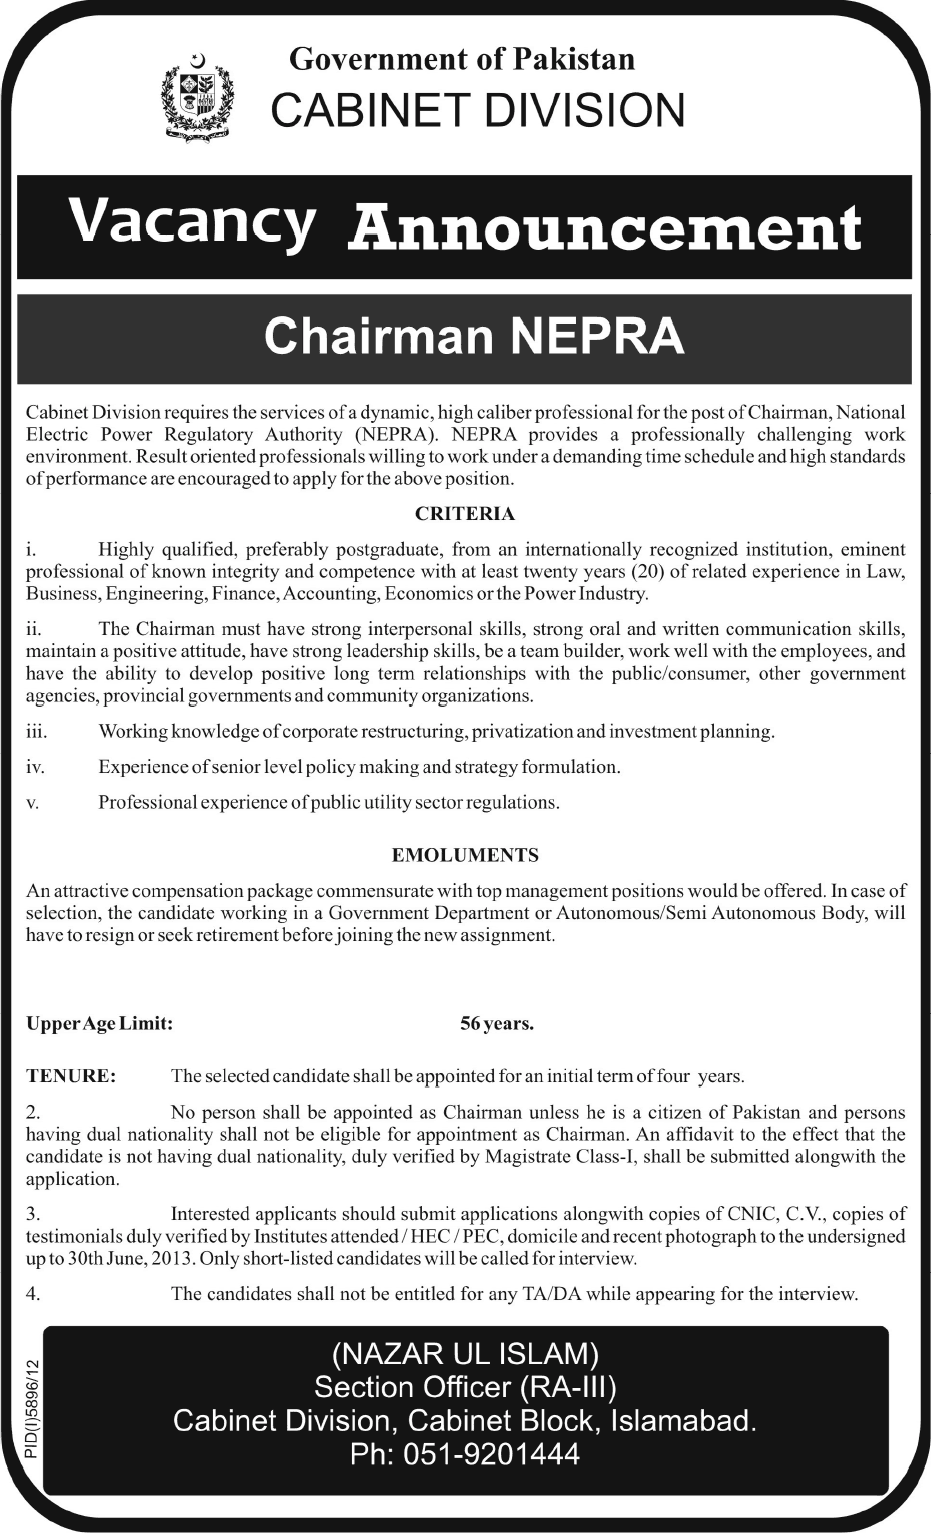 Cabinet Division Pakistan Job 2013 for Chairman NEPRA (National Electric Power Regulatory Authority)